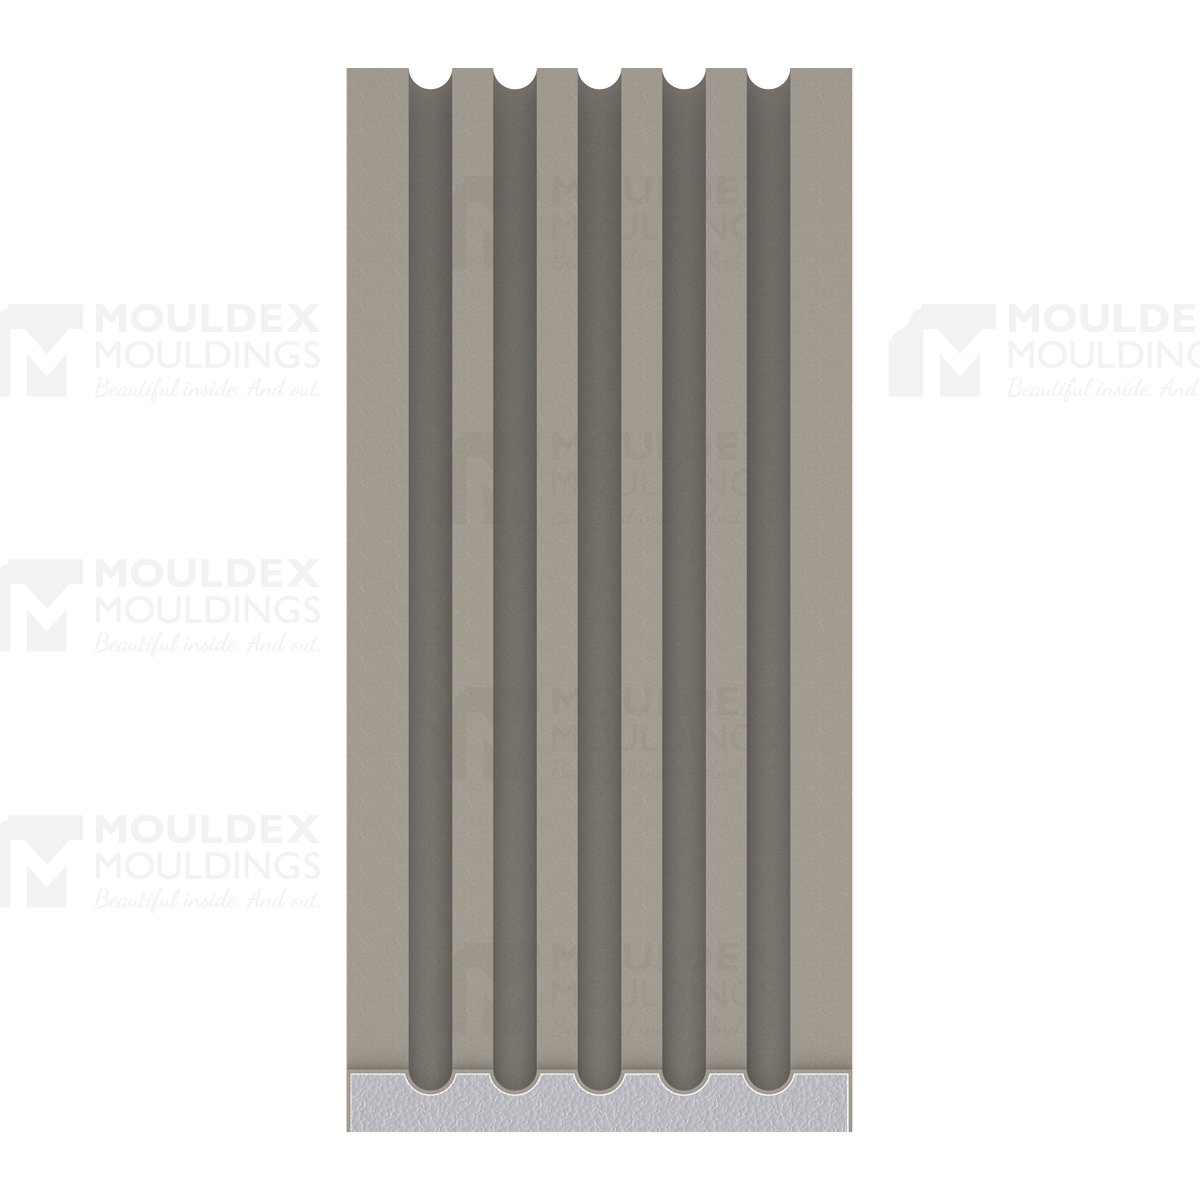 The Flute 10 Composite Exterior Fluted Pilaster